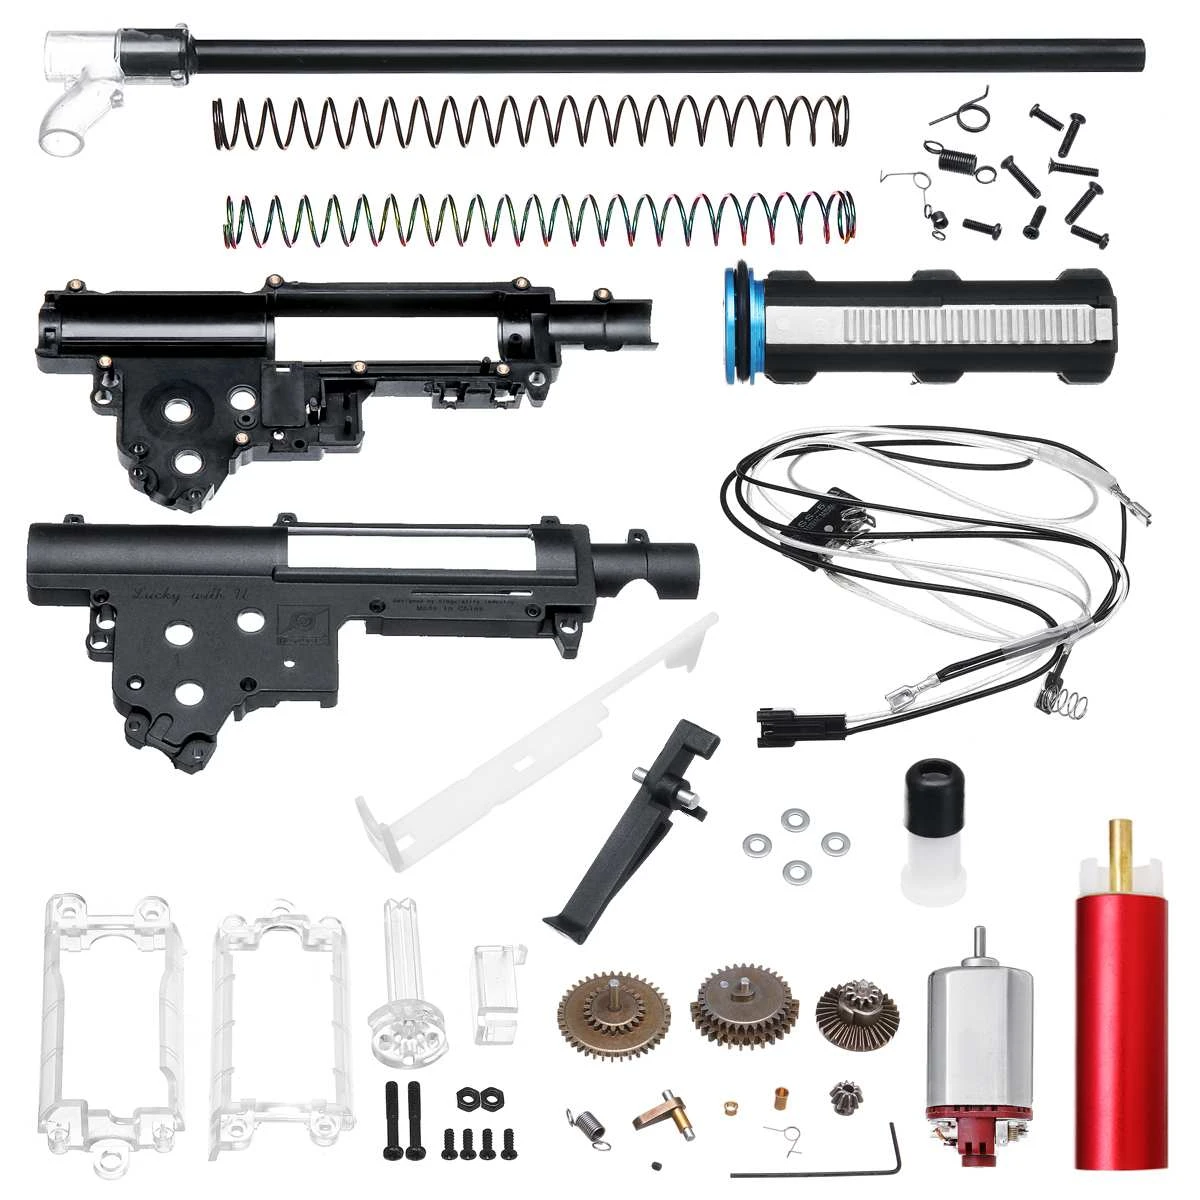 Details about  / Gel Ball Blaster Toy Gun Gearbox Cable Repair Parts for JinMing SCAR V2 /& Gen8